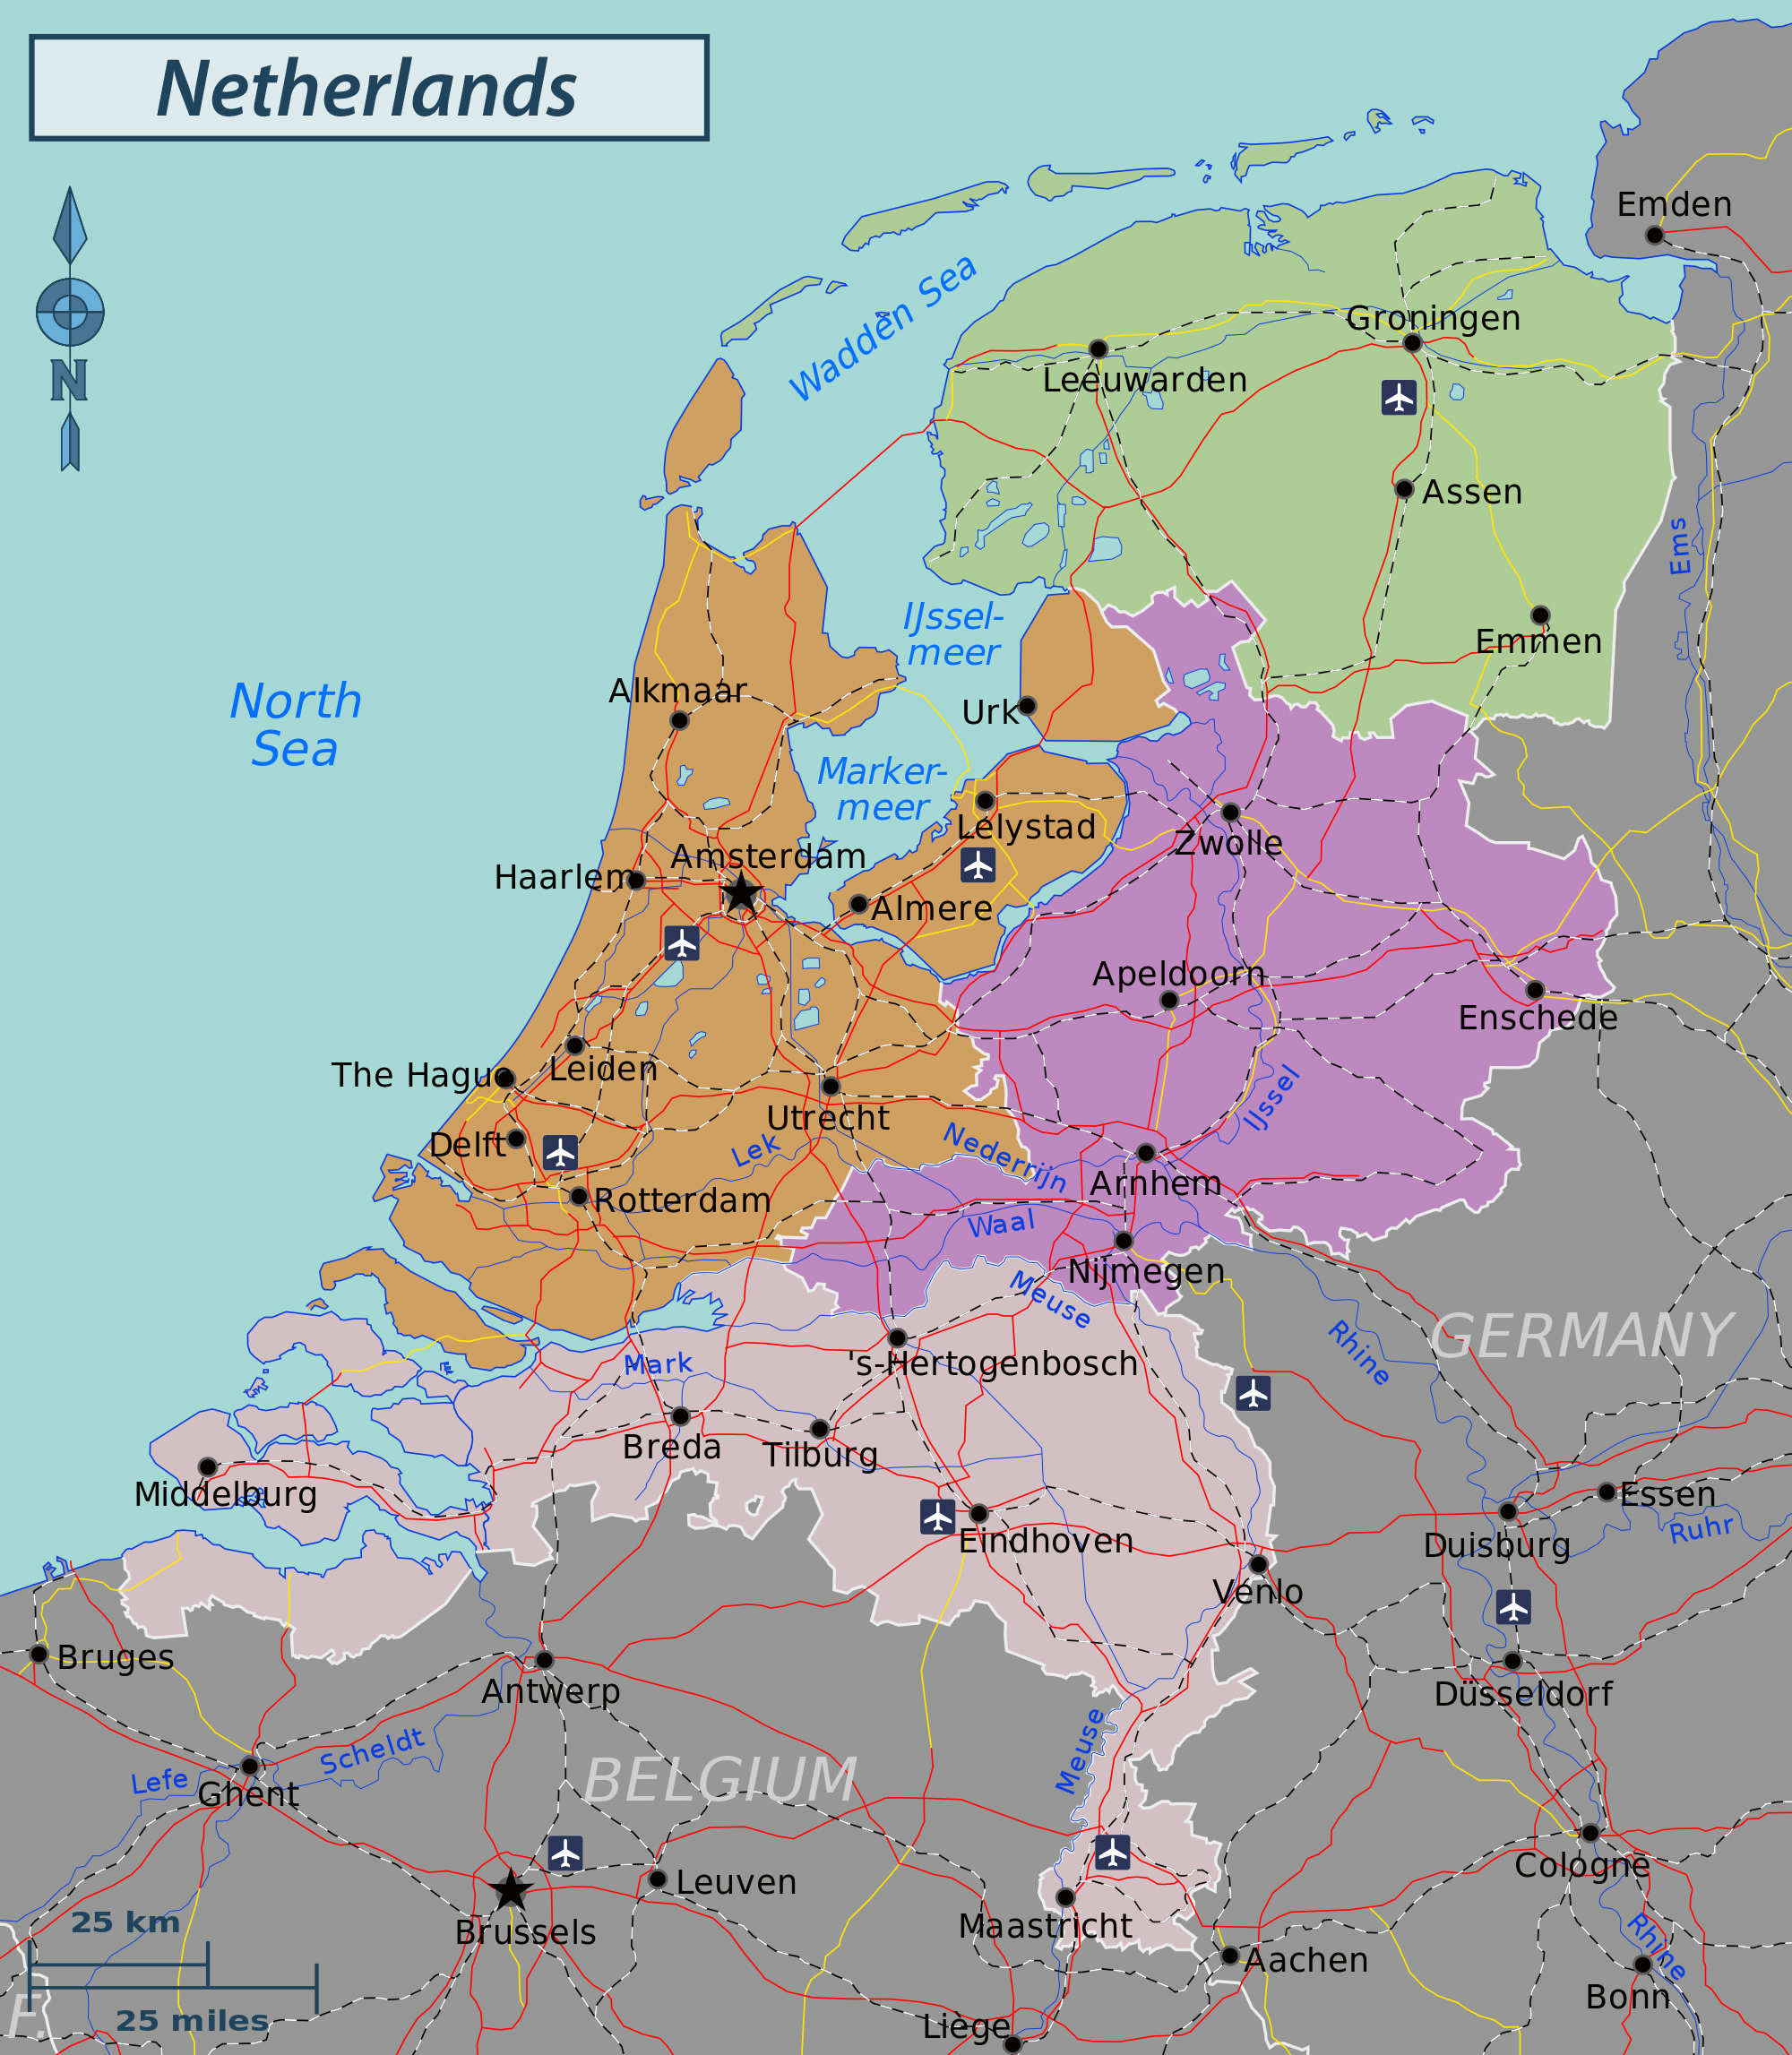 Large Regions Map Of Netherlands 